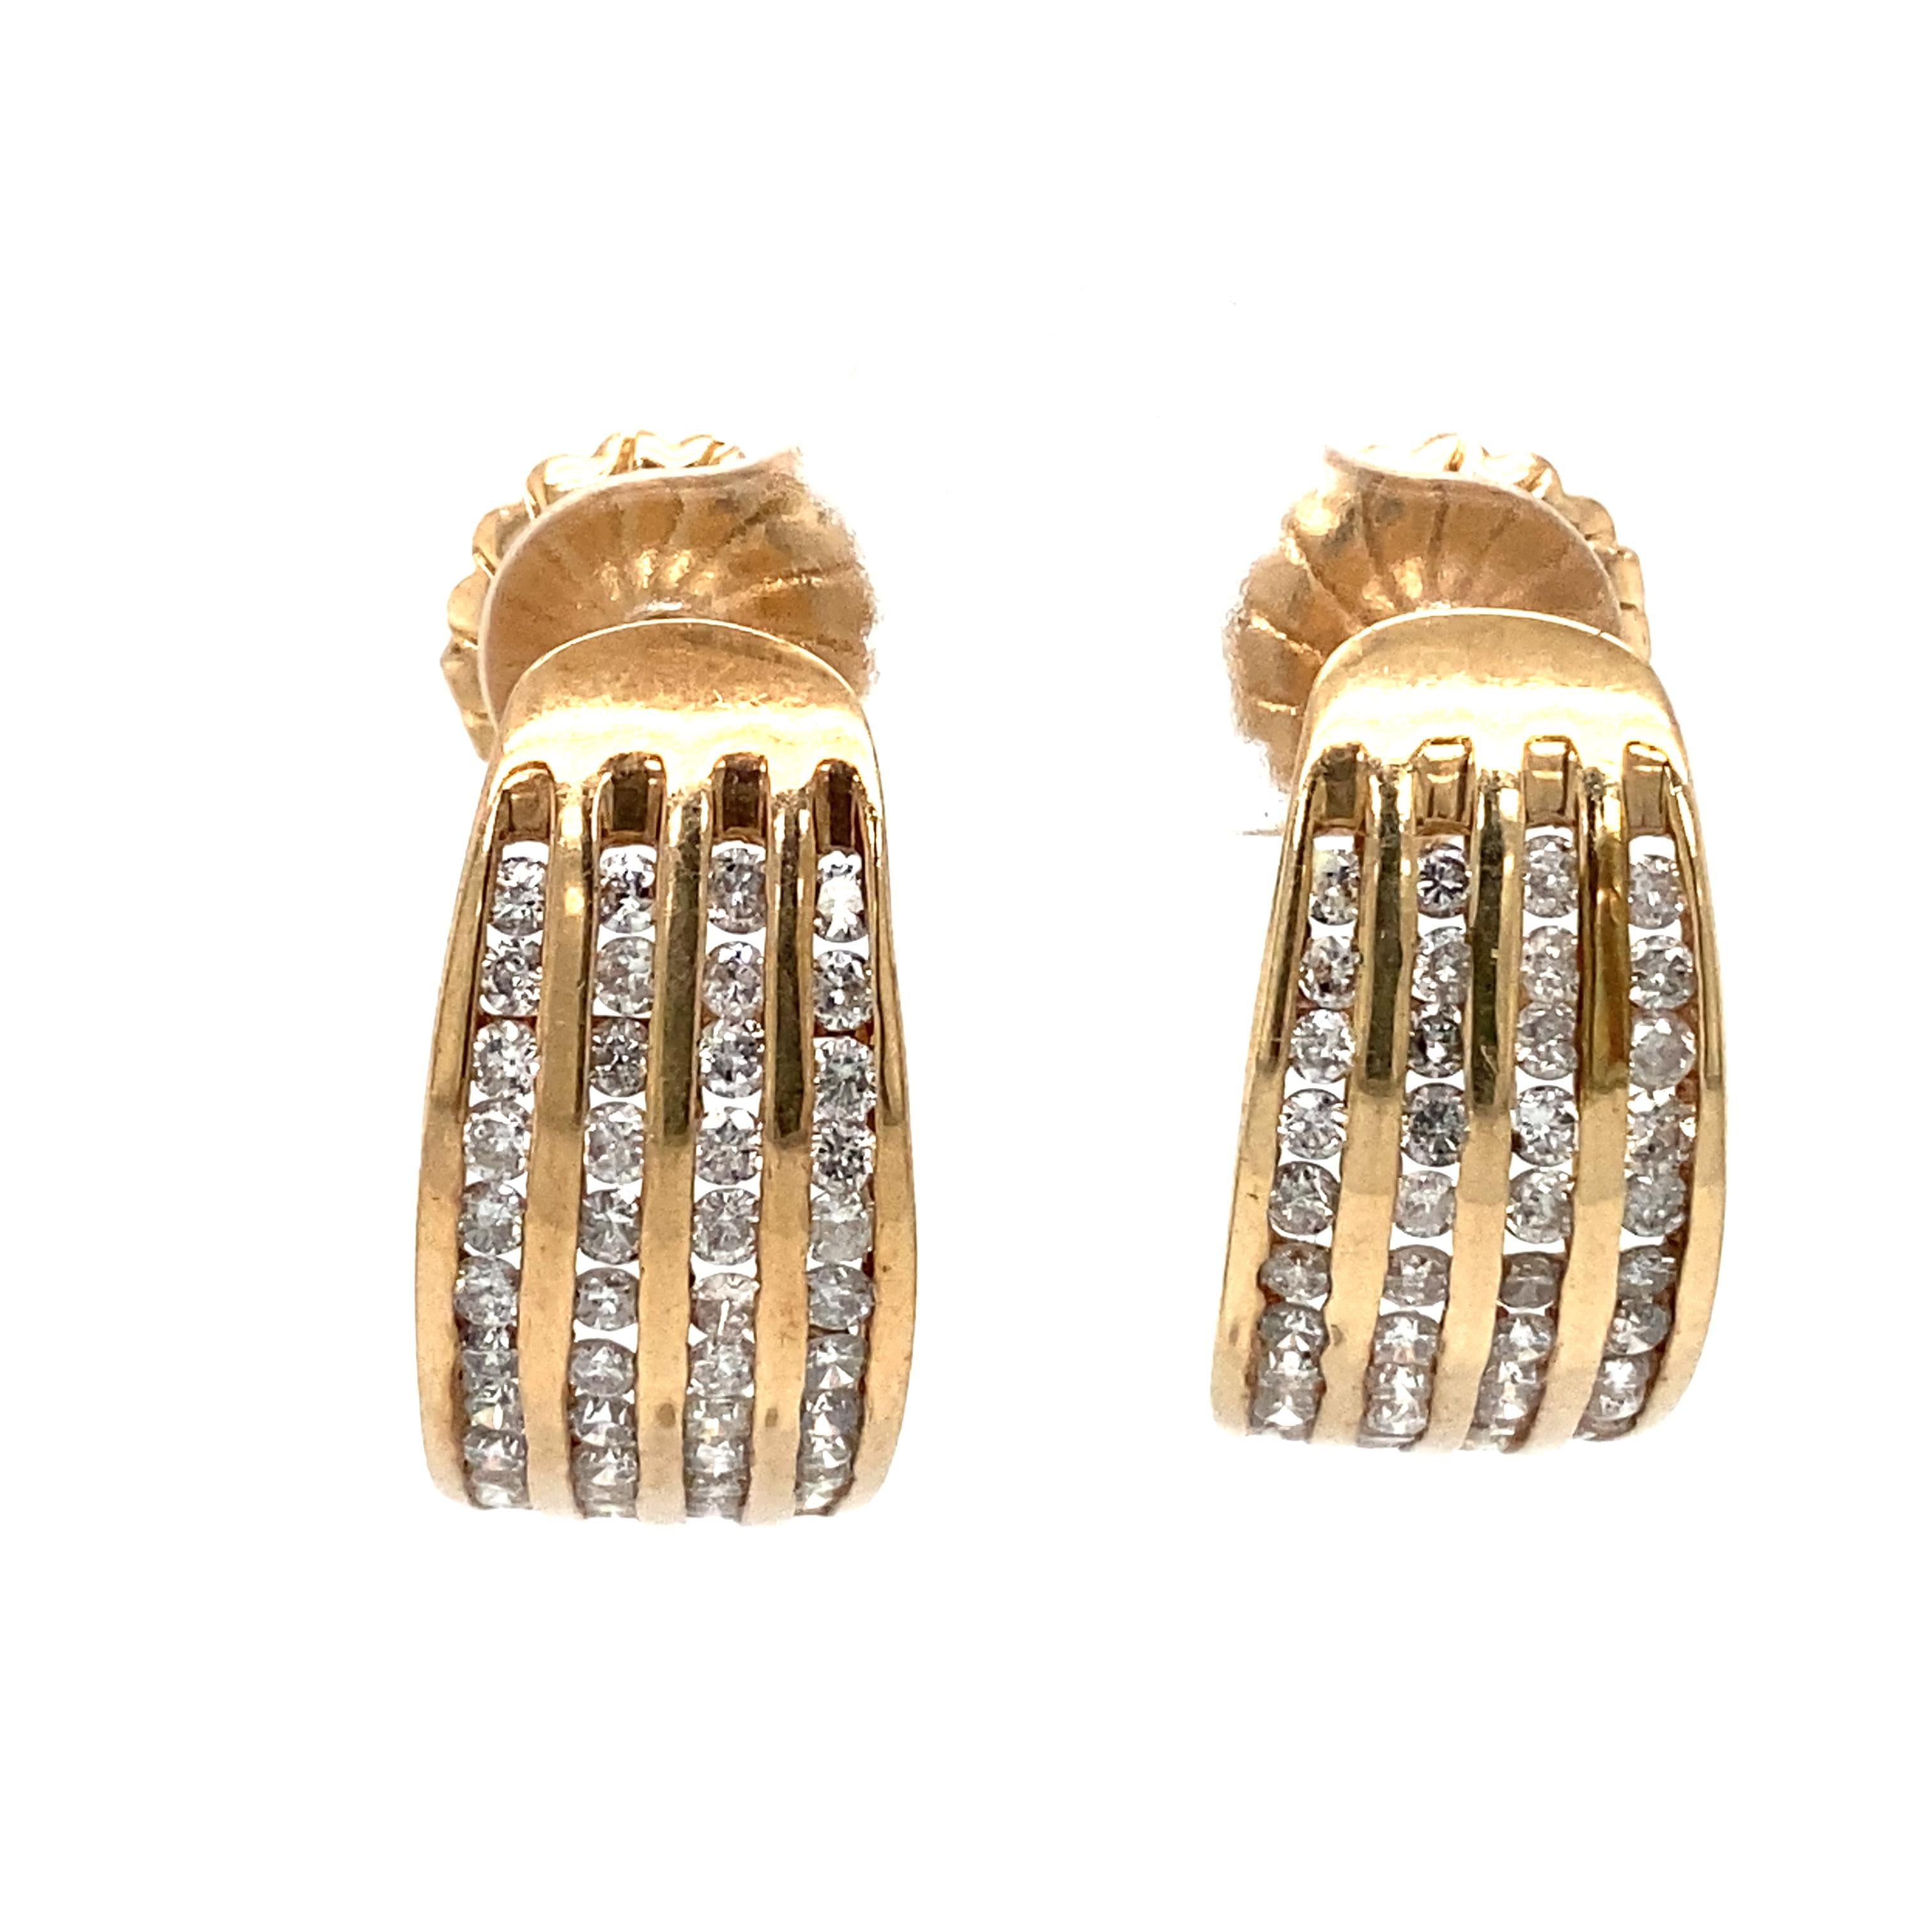 Retro 1960s Curved Four Row Channel Set Diamond Earrings in 10 Karat Gold For Sale